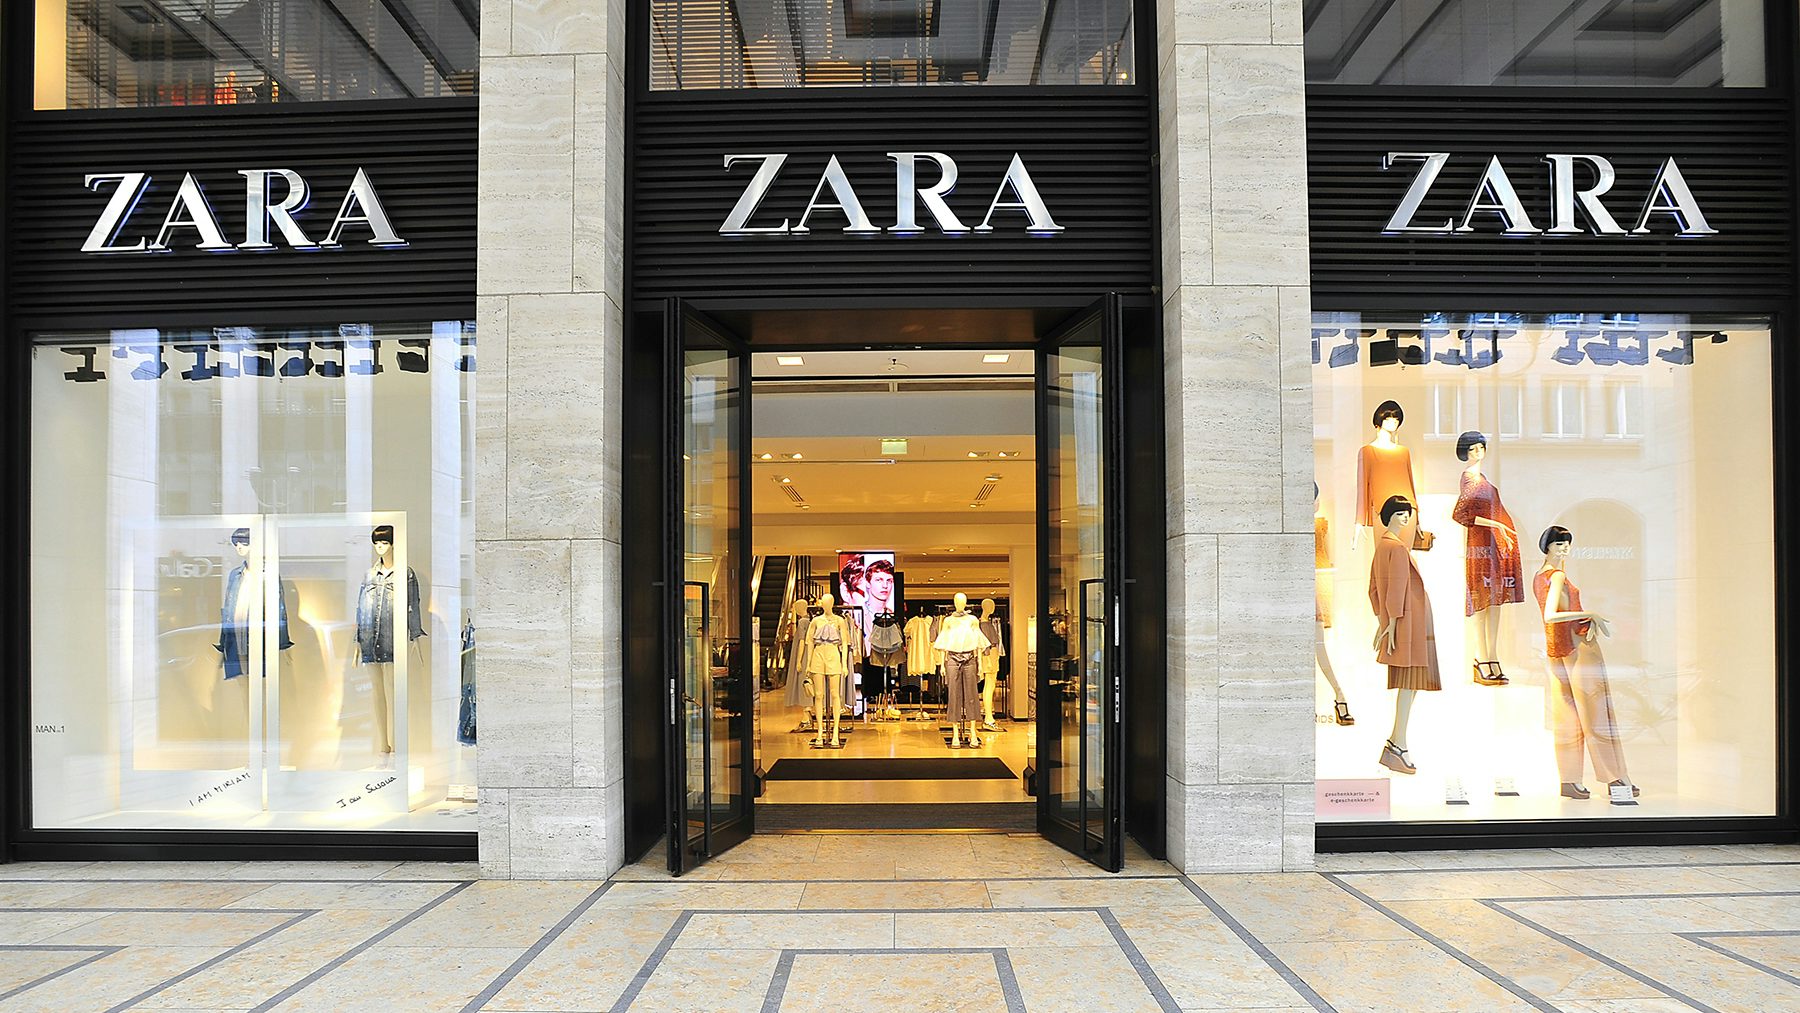 what kind of store is zara